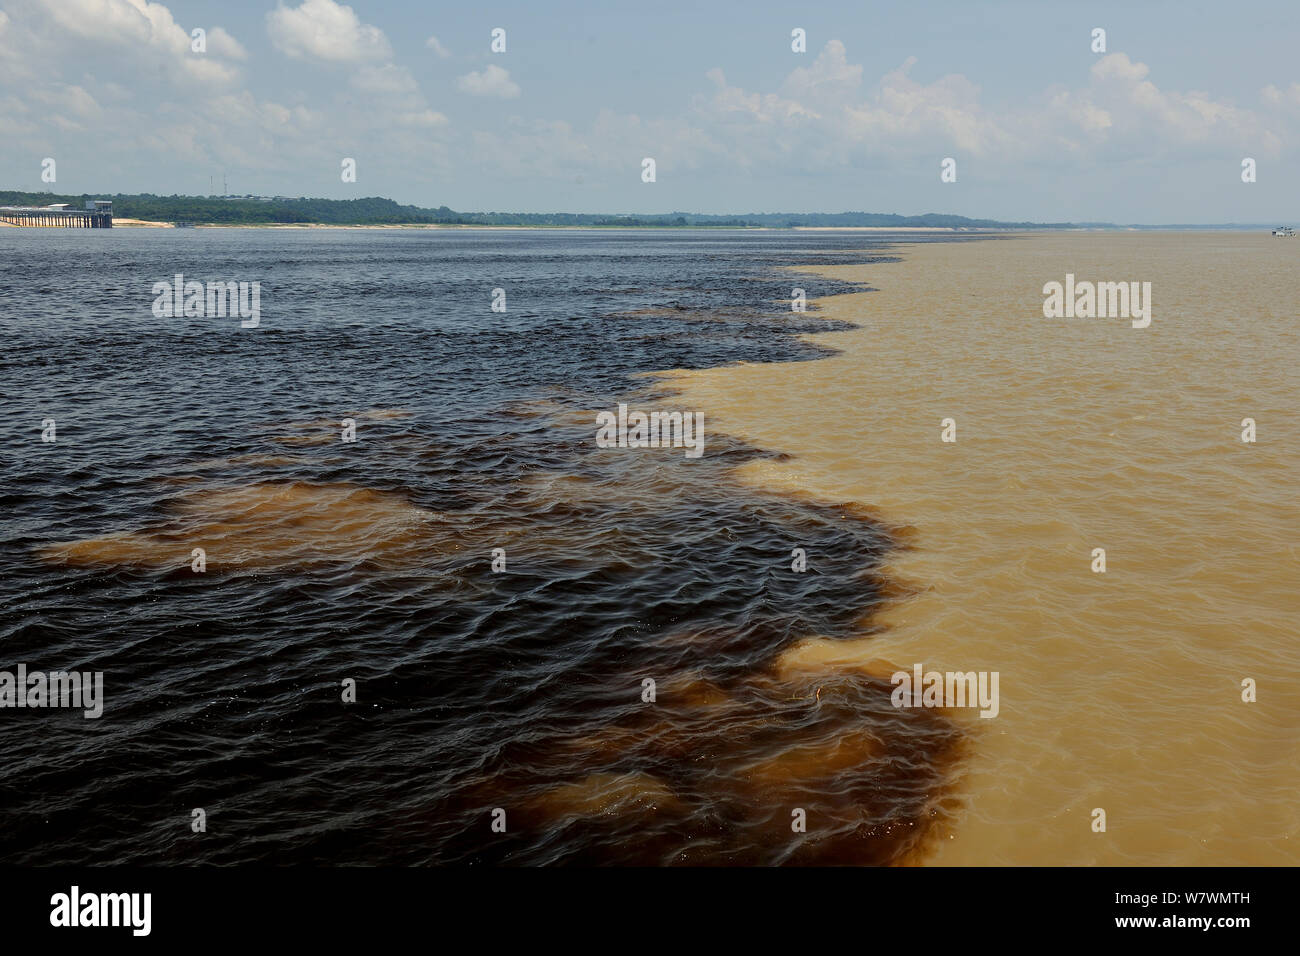 Meeting of the waters of Negro and Solimoes River, forming the Amazon River, 18 km East of Manaus, Amazonas State, Northern Brazil. Stock Photo